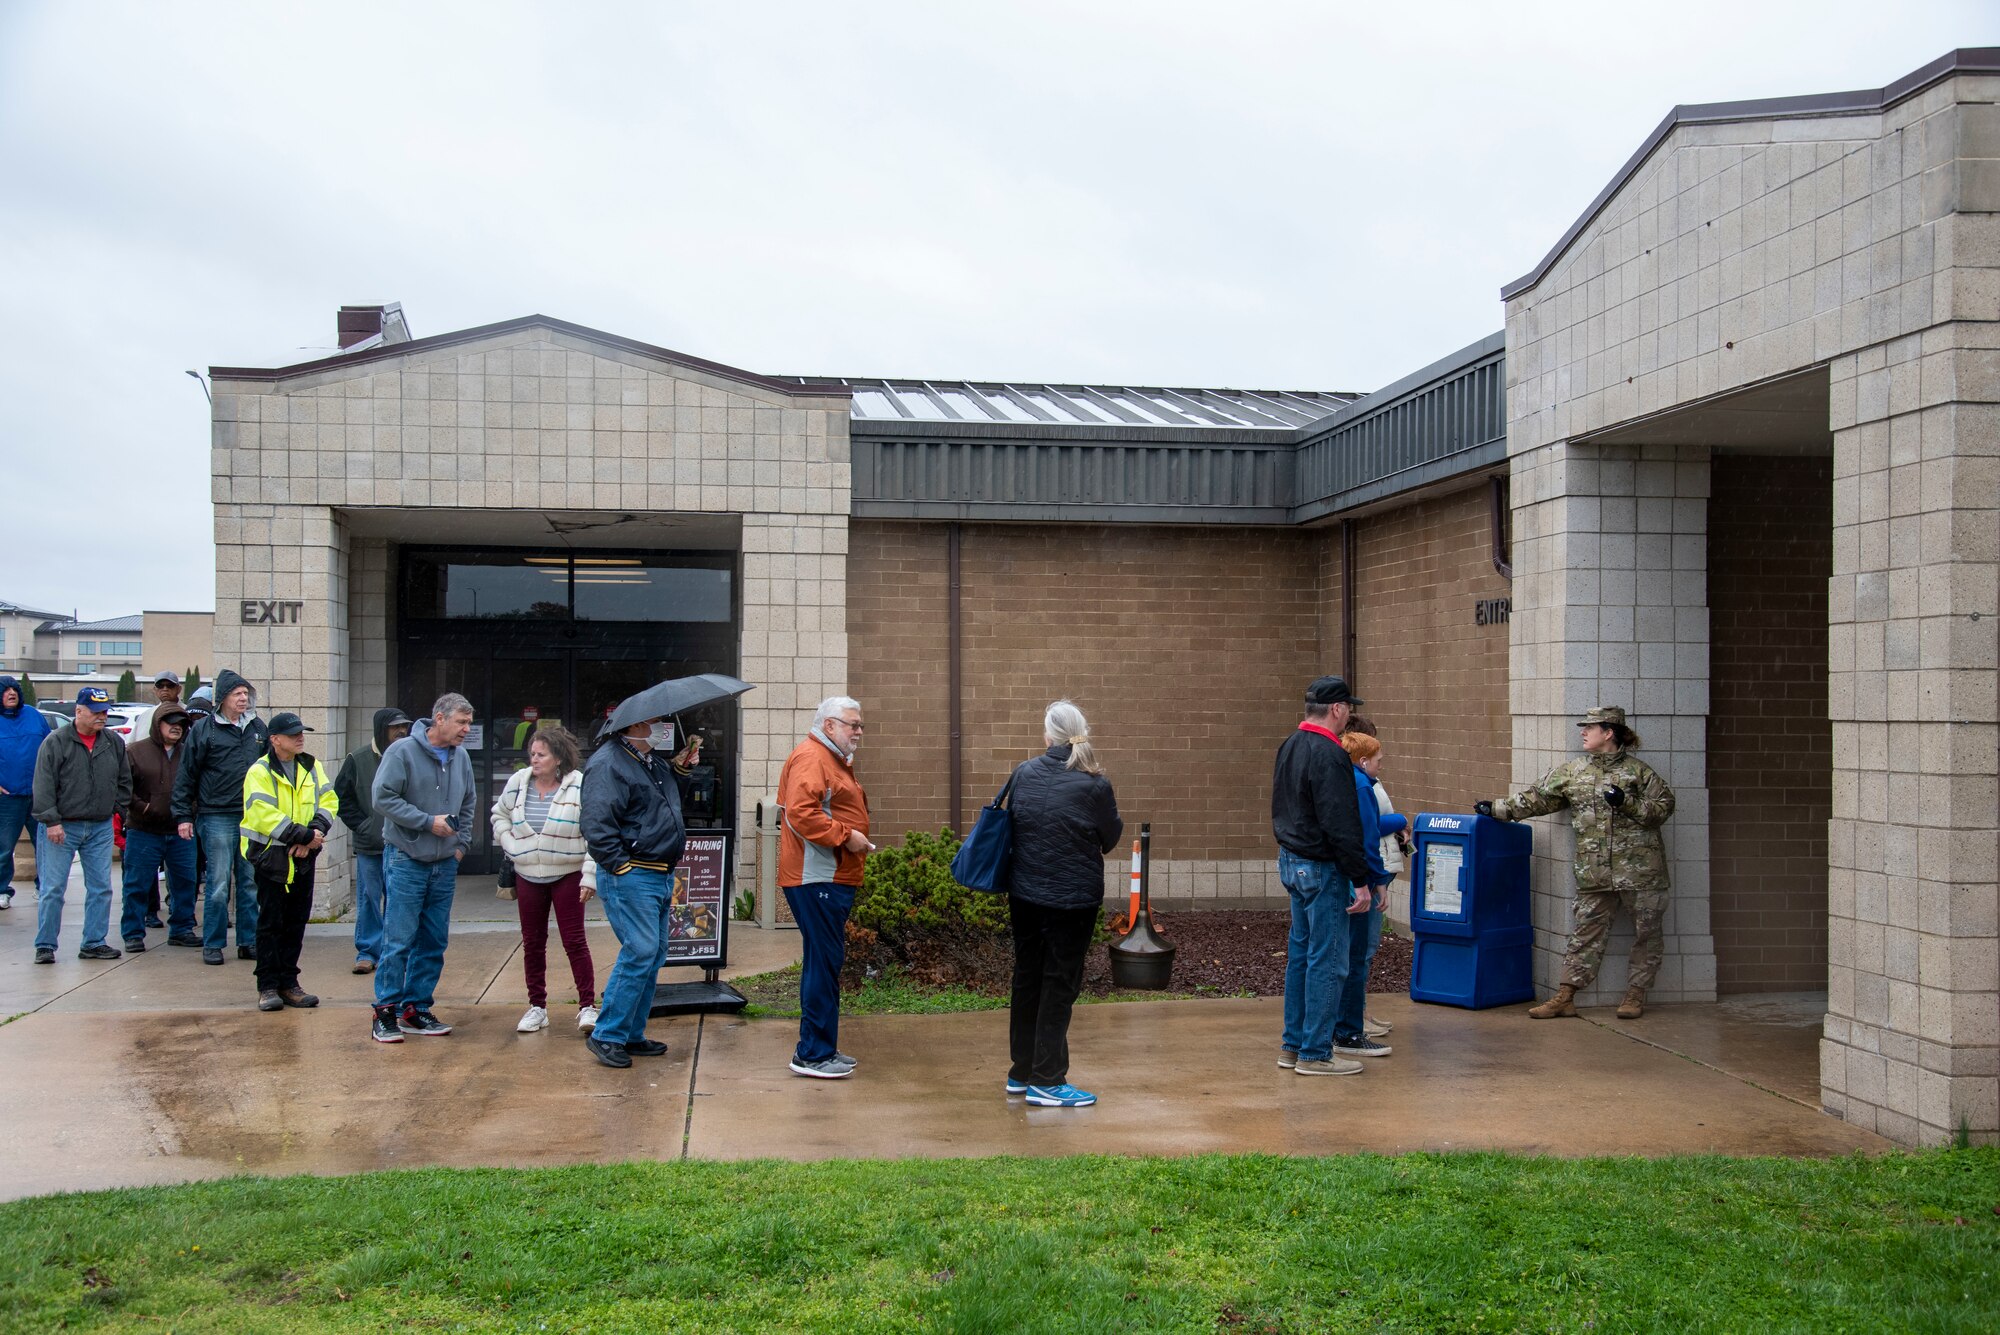 Shoppers form a line outside the Dover Air Force Base , Delaware Commissary on March 25, 2020, while base Chiefs and First Sergeants check IDs and keep a guest count; seventy-five guests were allowed in the building at a time. The Chiefs Group and First Sergeants volunteered at the Commissary checking IDs, assisting with social distancing measures, and stocking shelves to help mitigate the spread of COVID-19, reduce confusion and ensure Airmen and their families still had access to essential items. (U.S. Air Force Photo by Airman 1st Class Jonathan Harding)(U.S. Air Force Photo by Airman 1st Class Jonathan Harding)